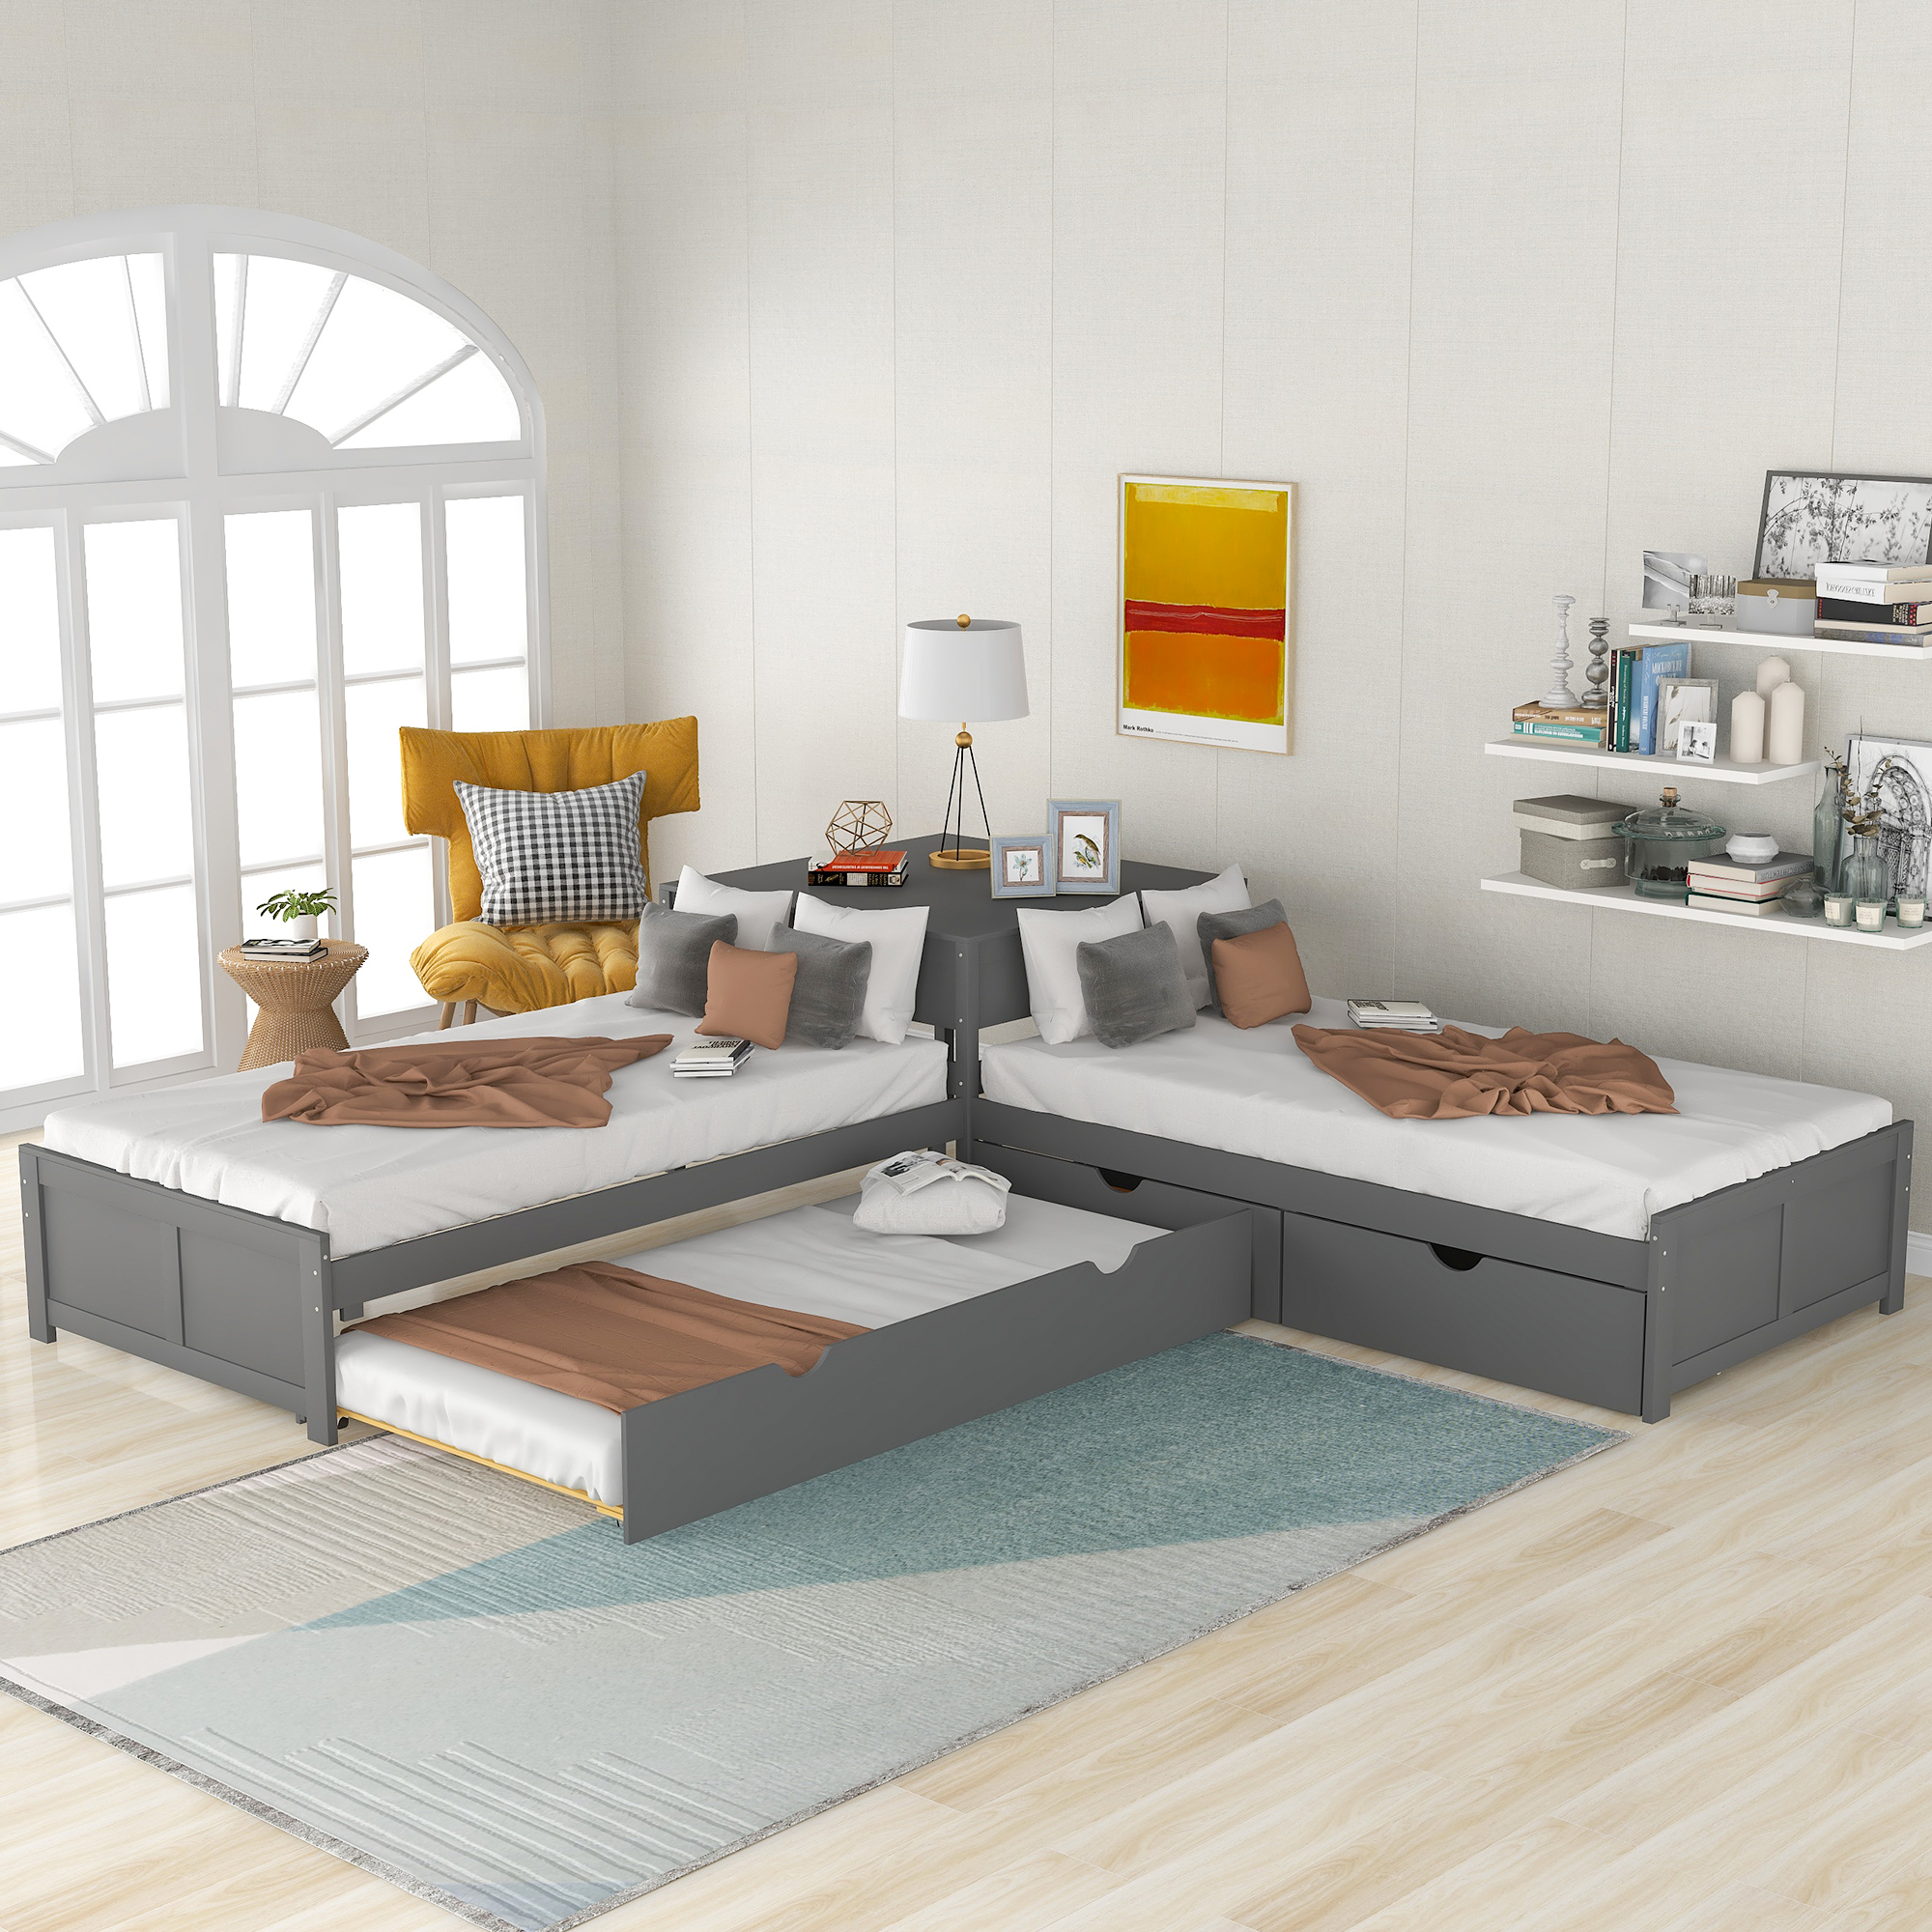 L-shaped Platform Bed with Trundle and Drawers Linked with built-in Desk,Twin,Gray-CASAINC